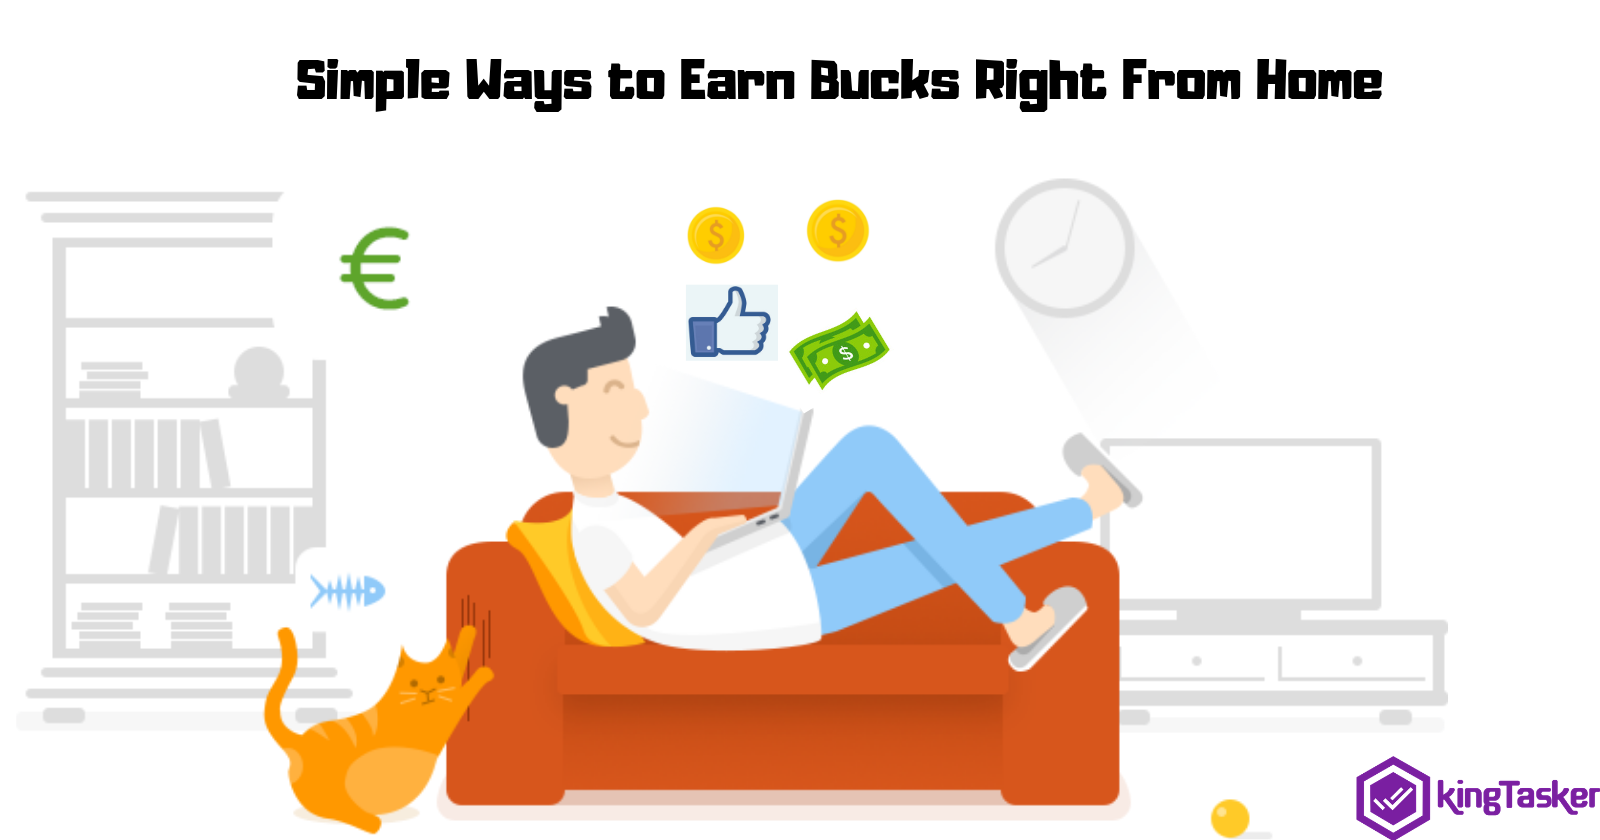 Simple Ways to Earn Bucks Right From Home